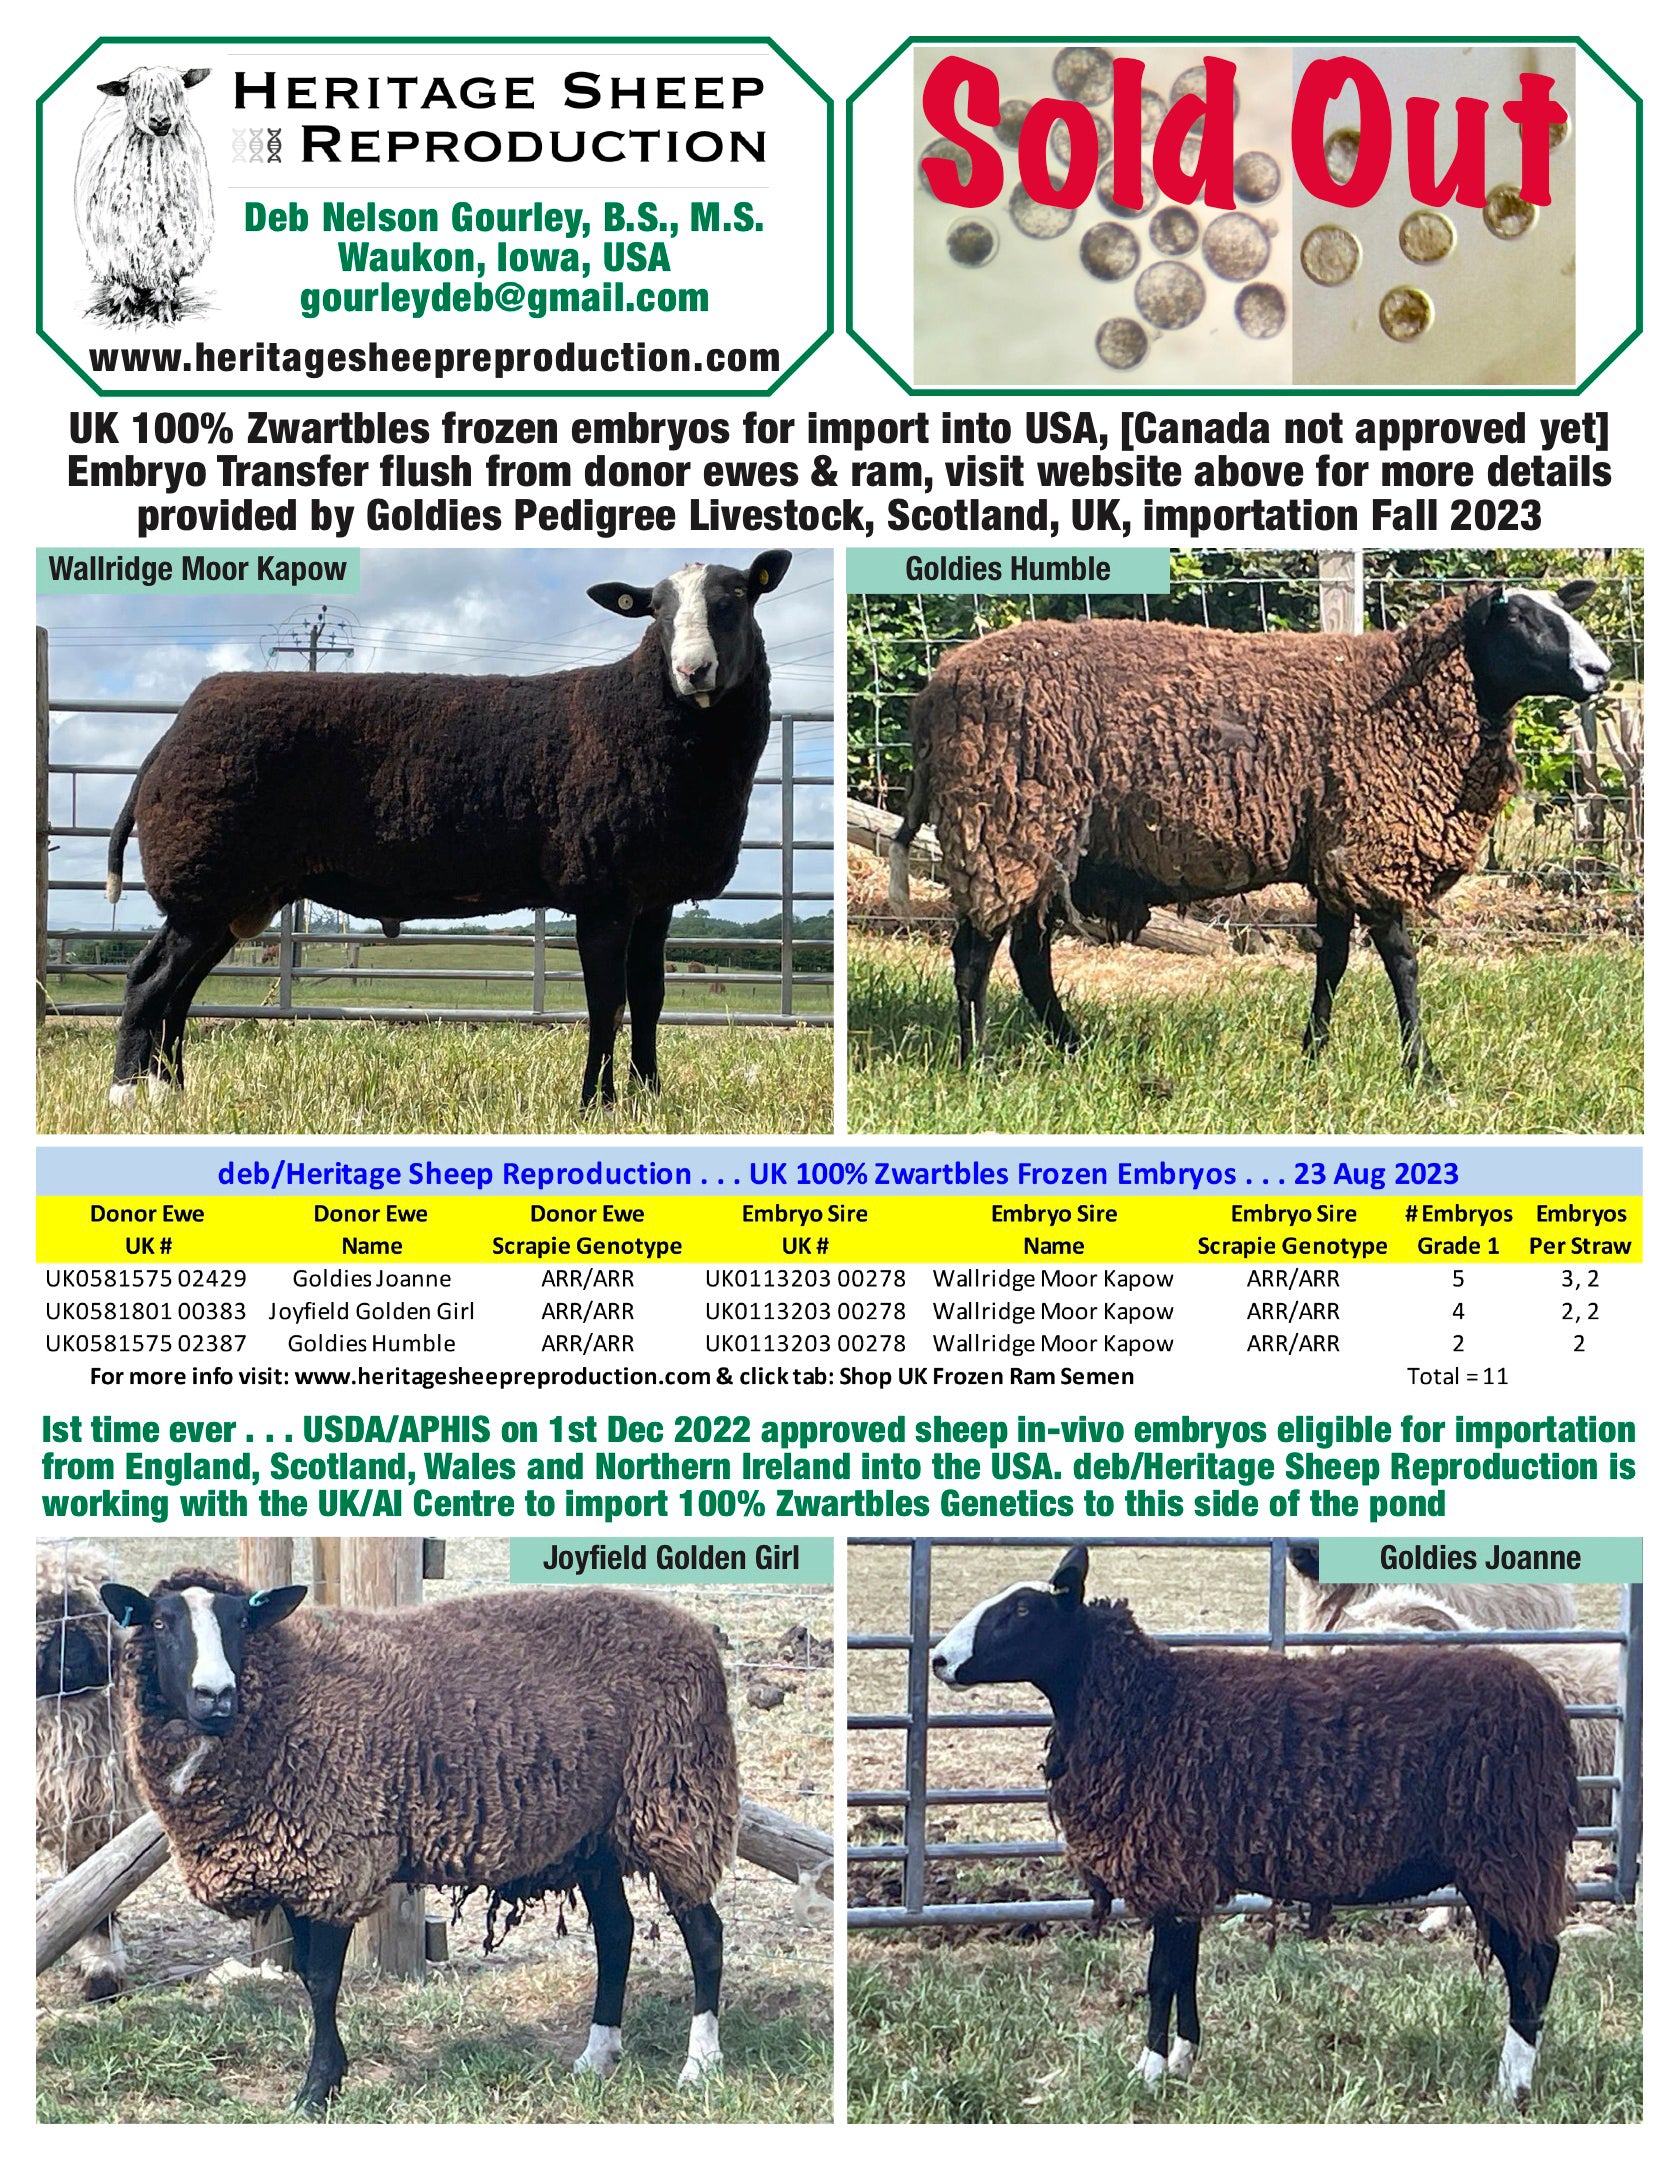 Zwartbles 100% UK Embryos from Donor Ewes & Rams - Tank #6 - Embryos Imported into USA - Sold Out